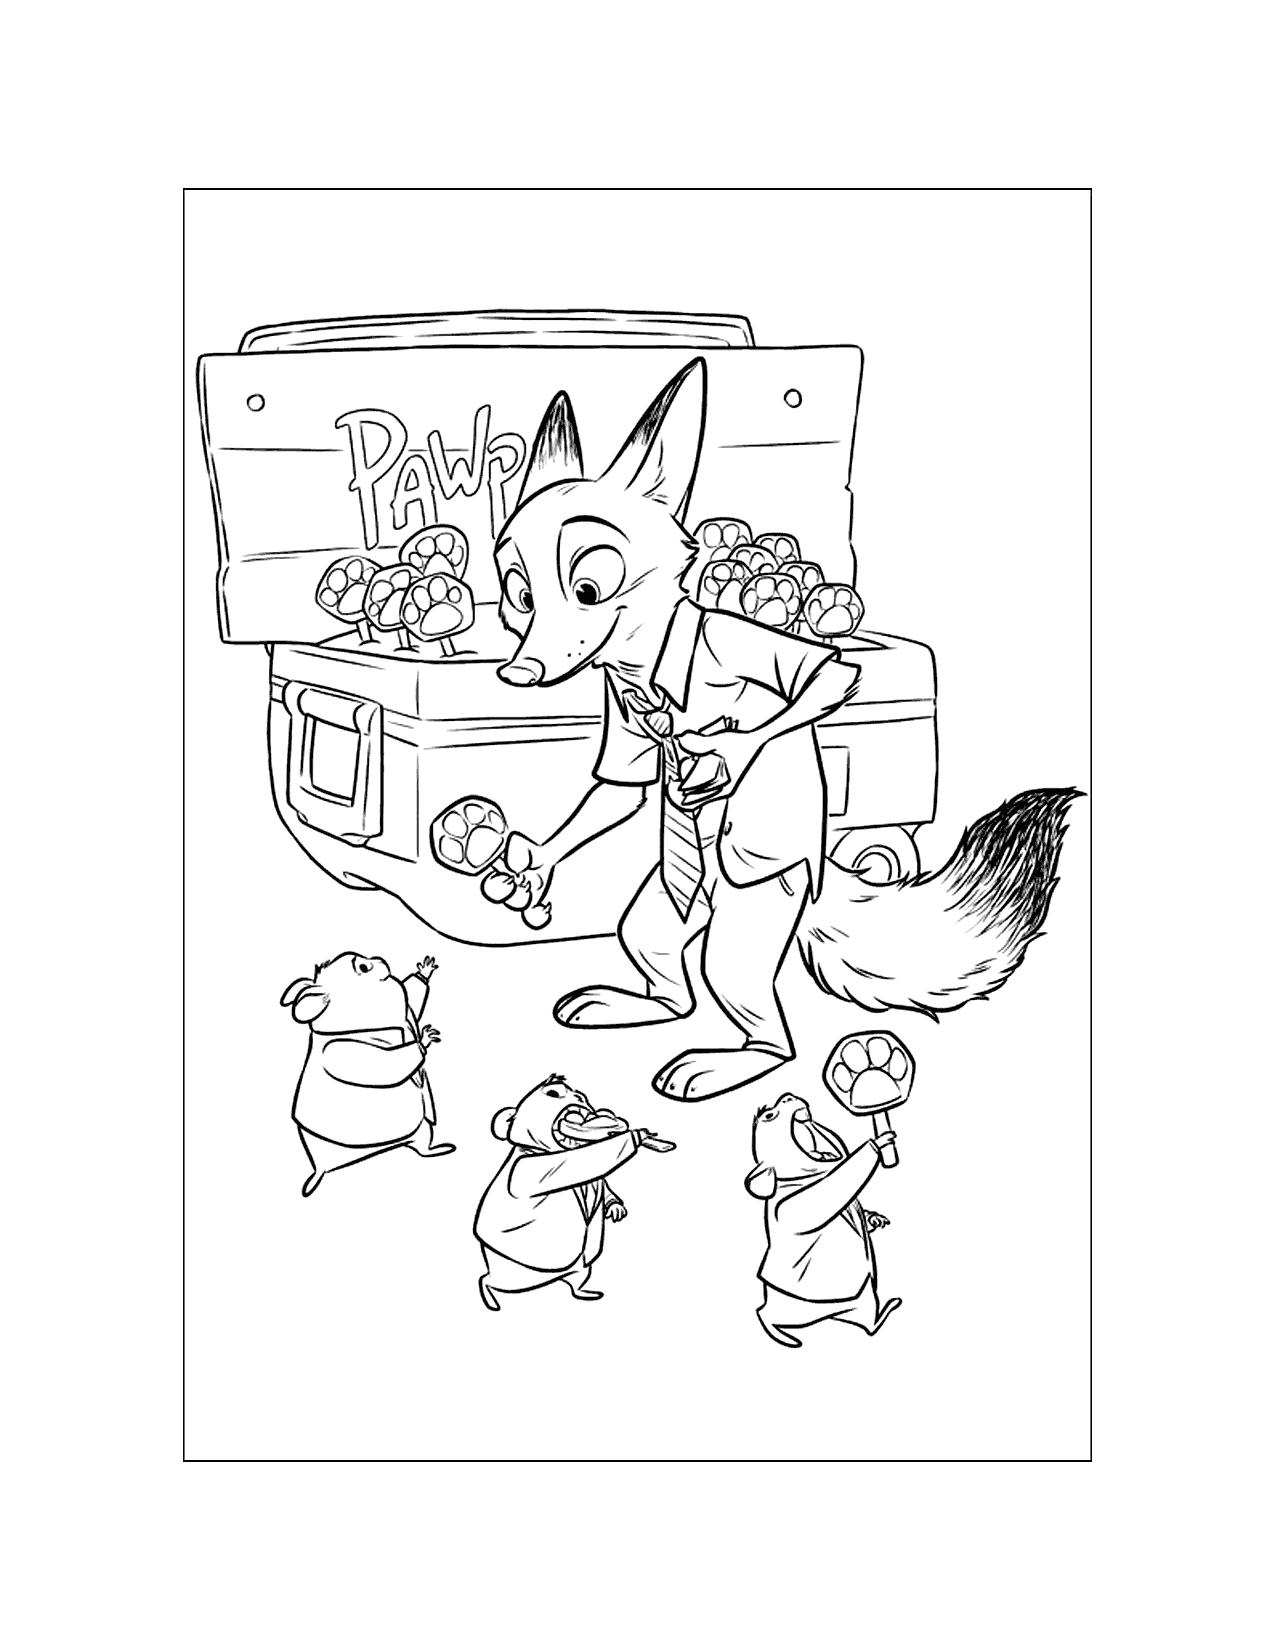 Nick Selling Popsicles Coloring Page